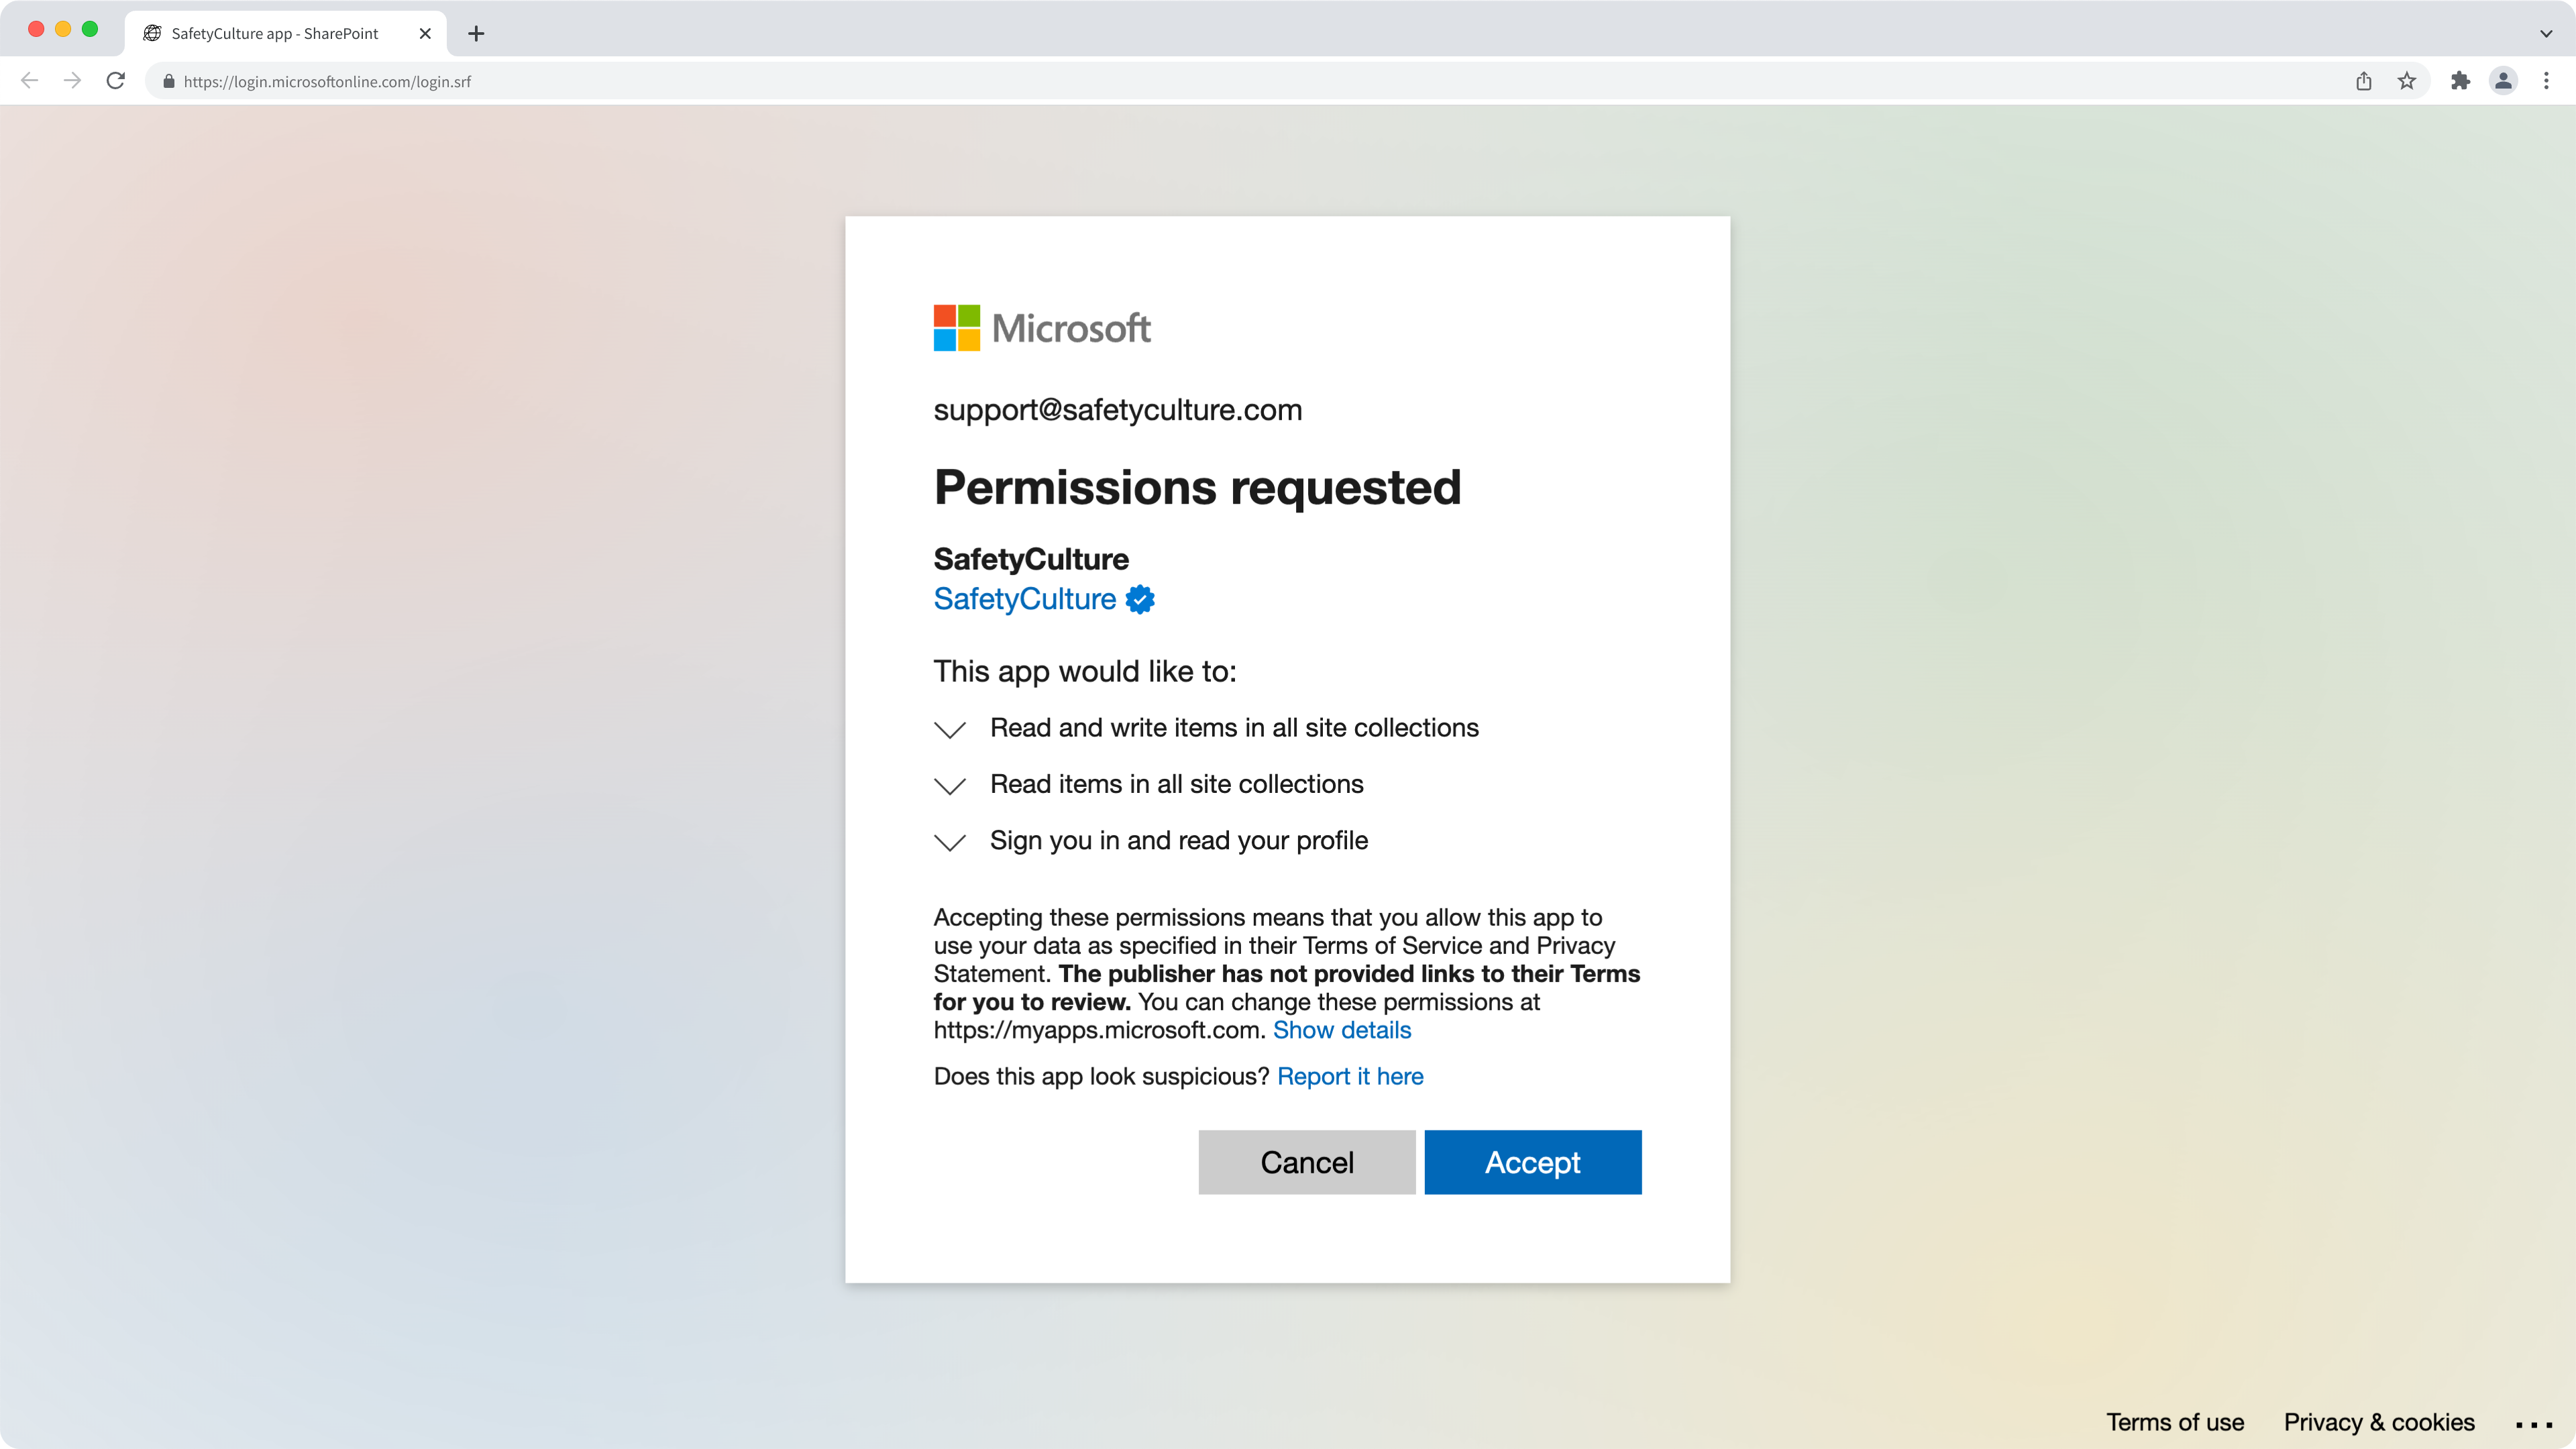 SharePoint: SafetyCulture app permissions request.